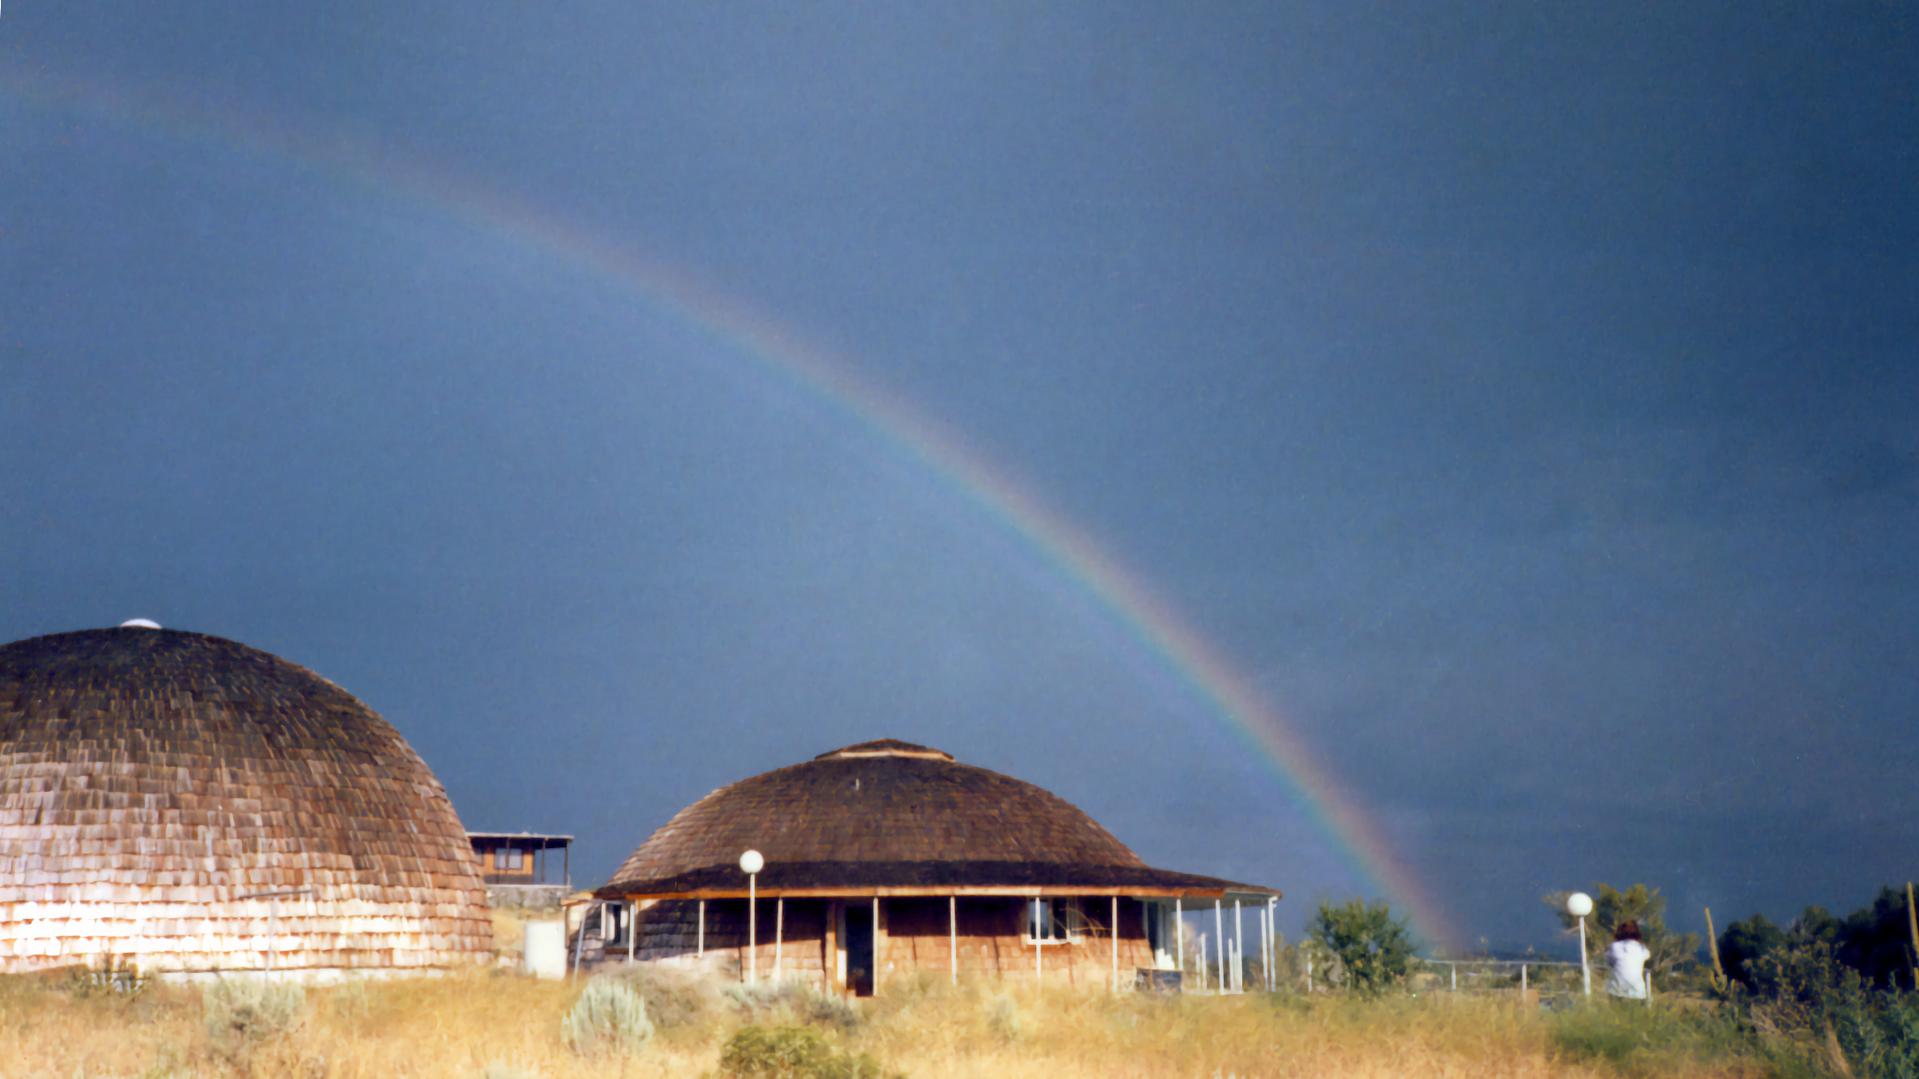 Rainbow over the dome house and garage.